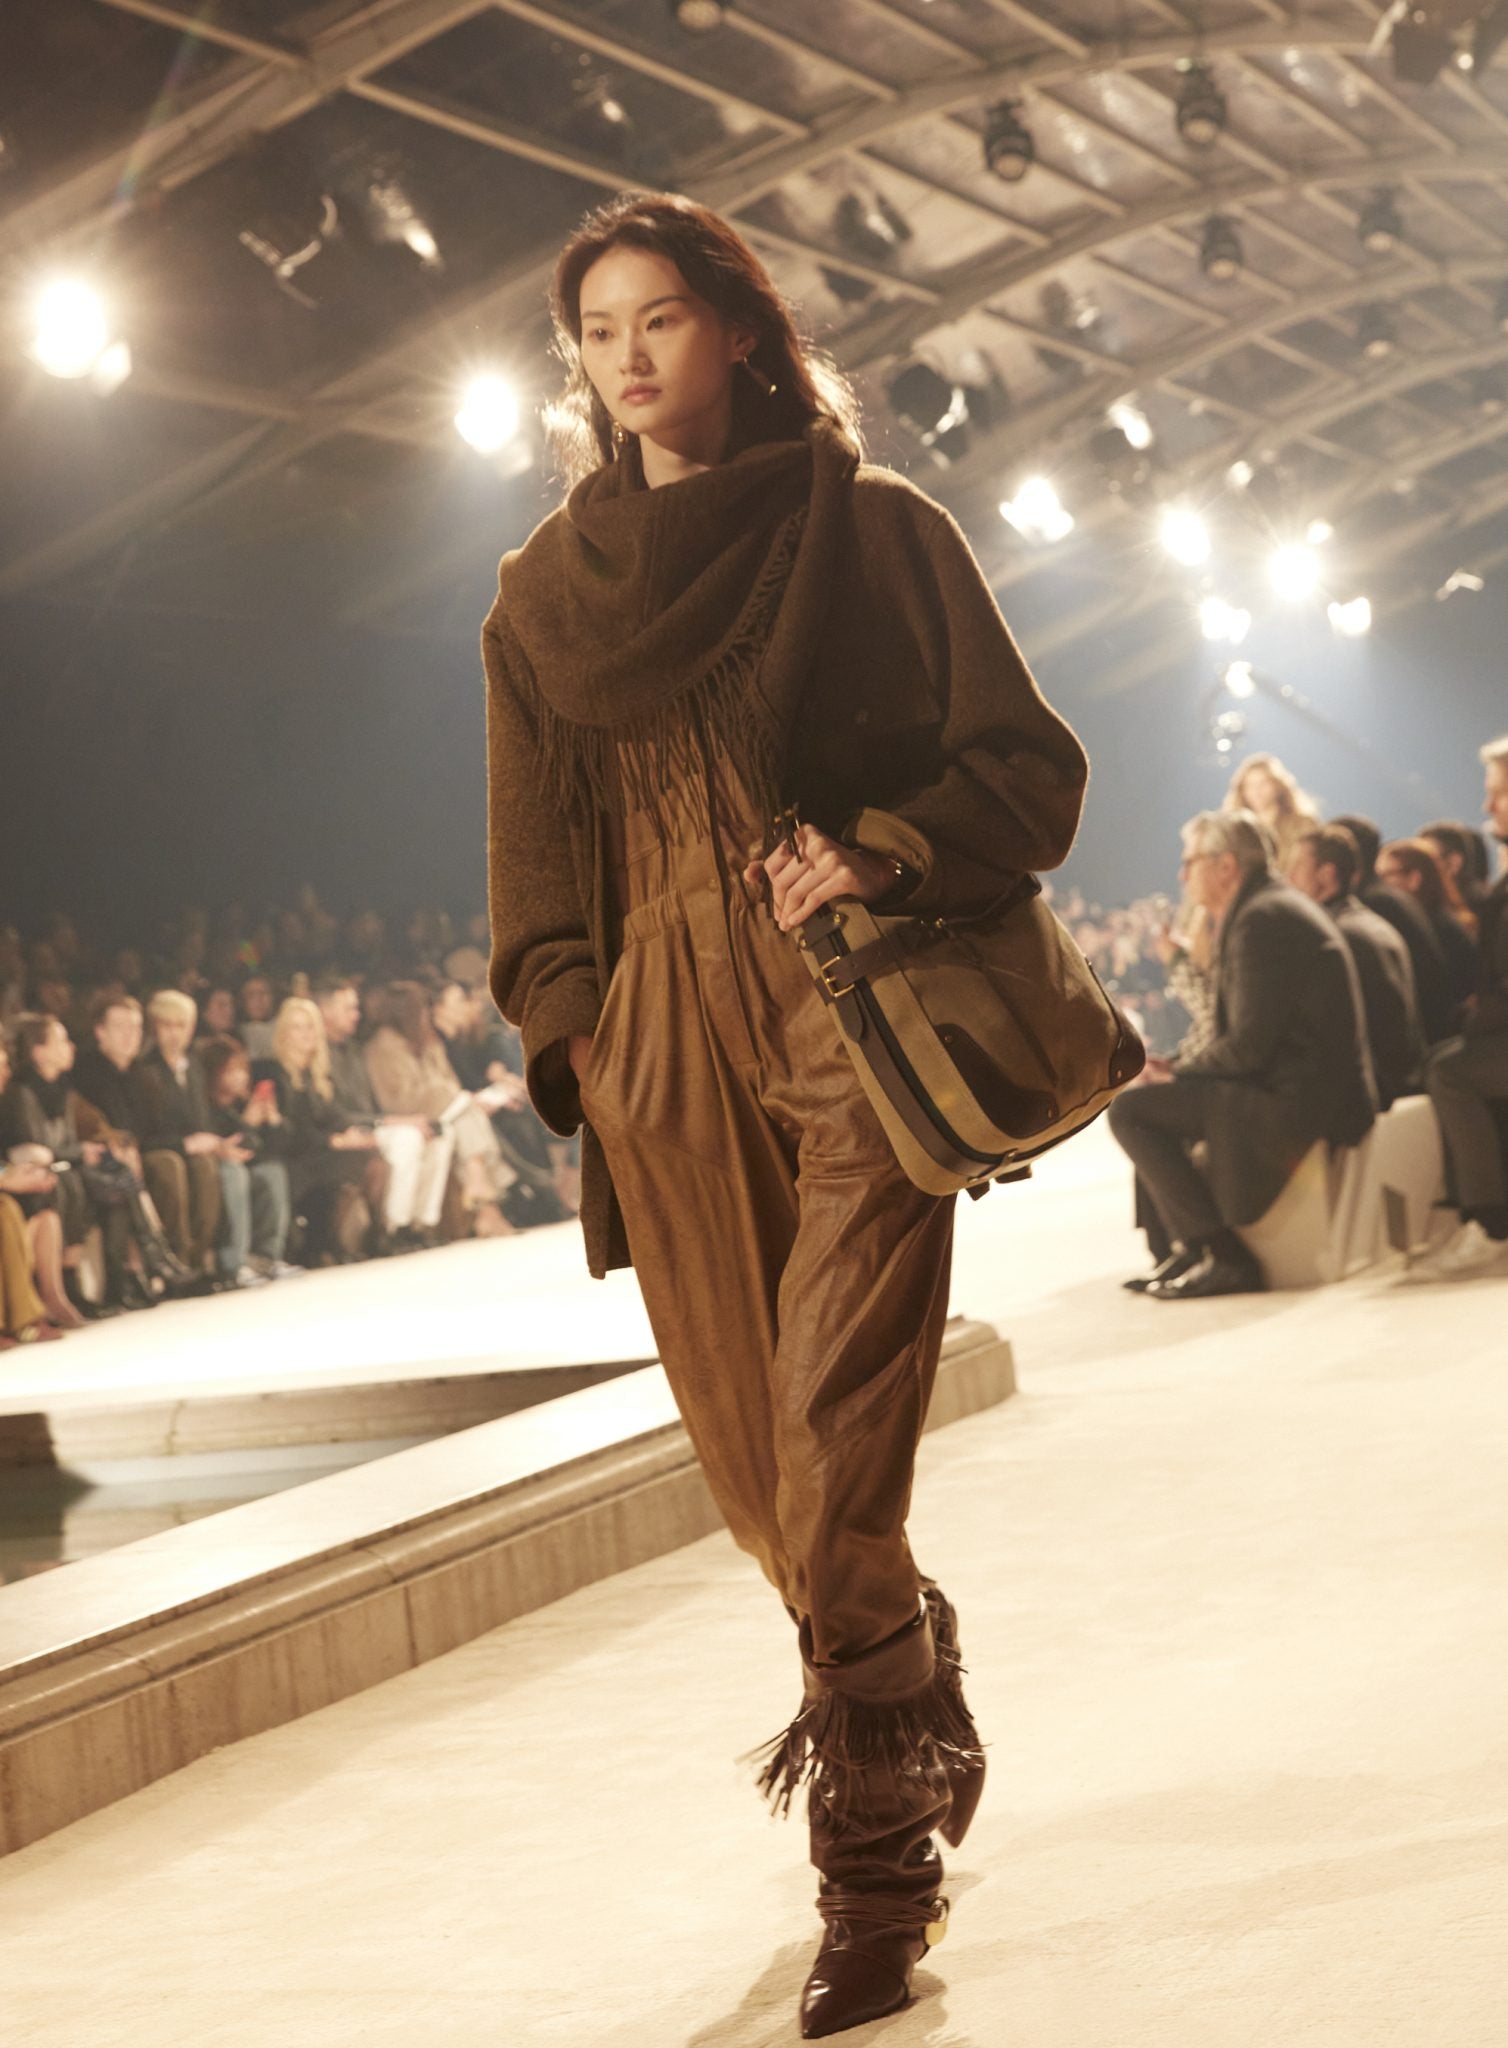 Female model on catwalk wearing a jumpsuit with waist gathers, fringed scarf, sweater and fringed boots, carrying a large bag, all in brown.